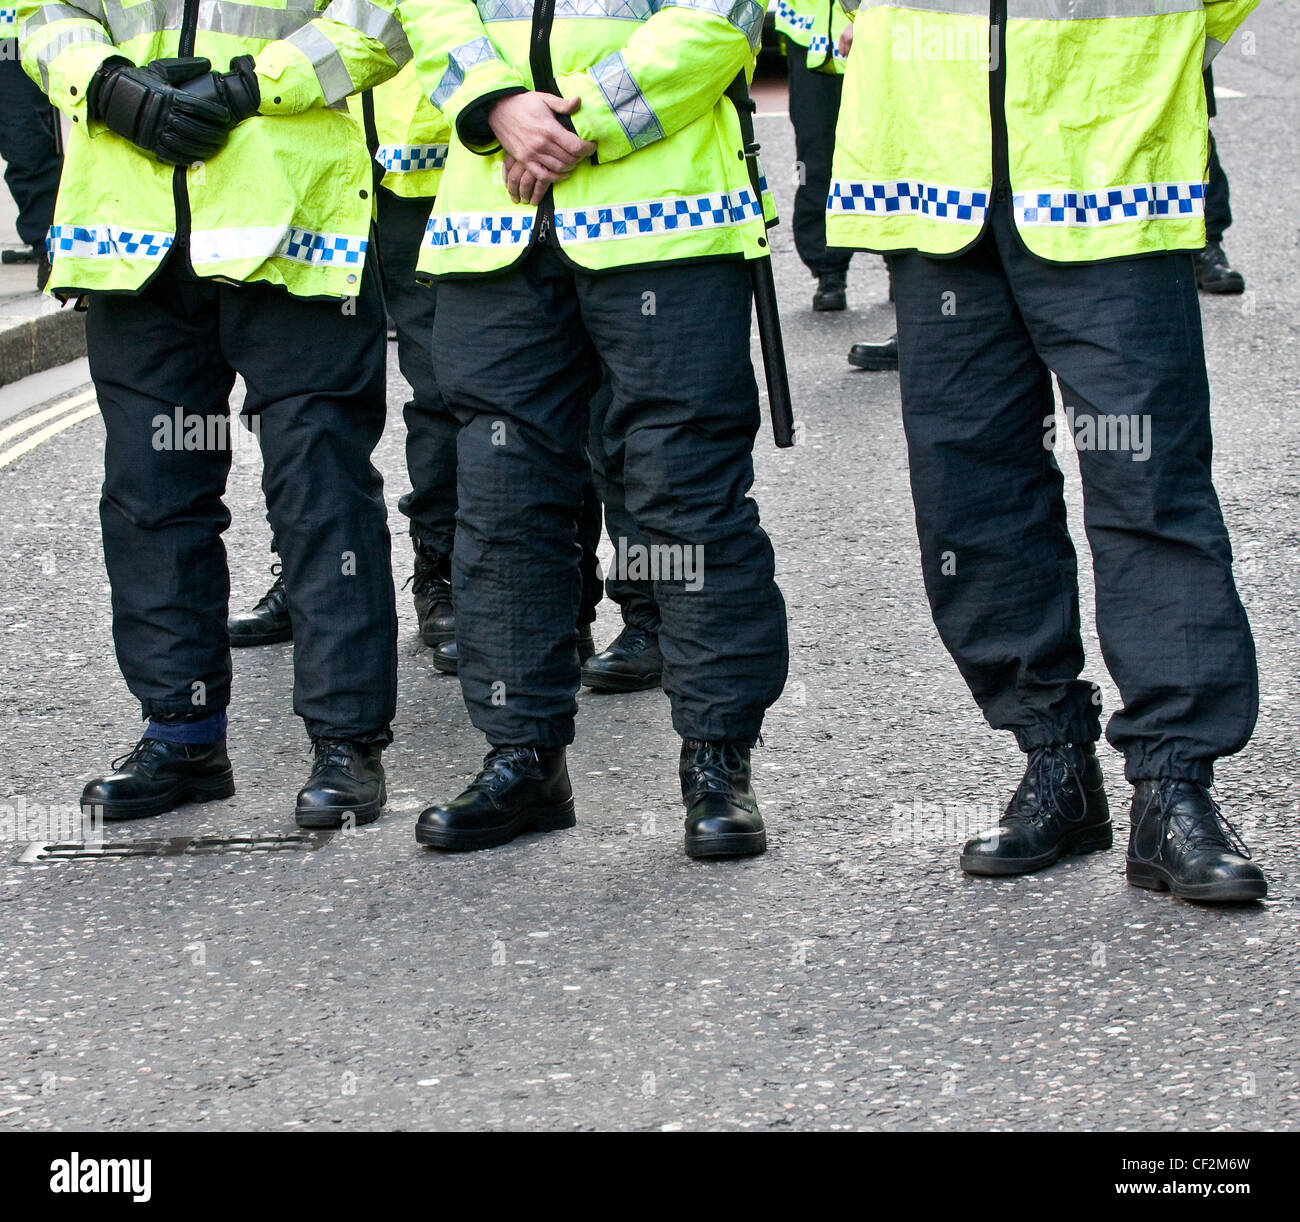 Policemen on duty at the G20 demonstration in the City of London. Stock Photo